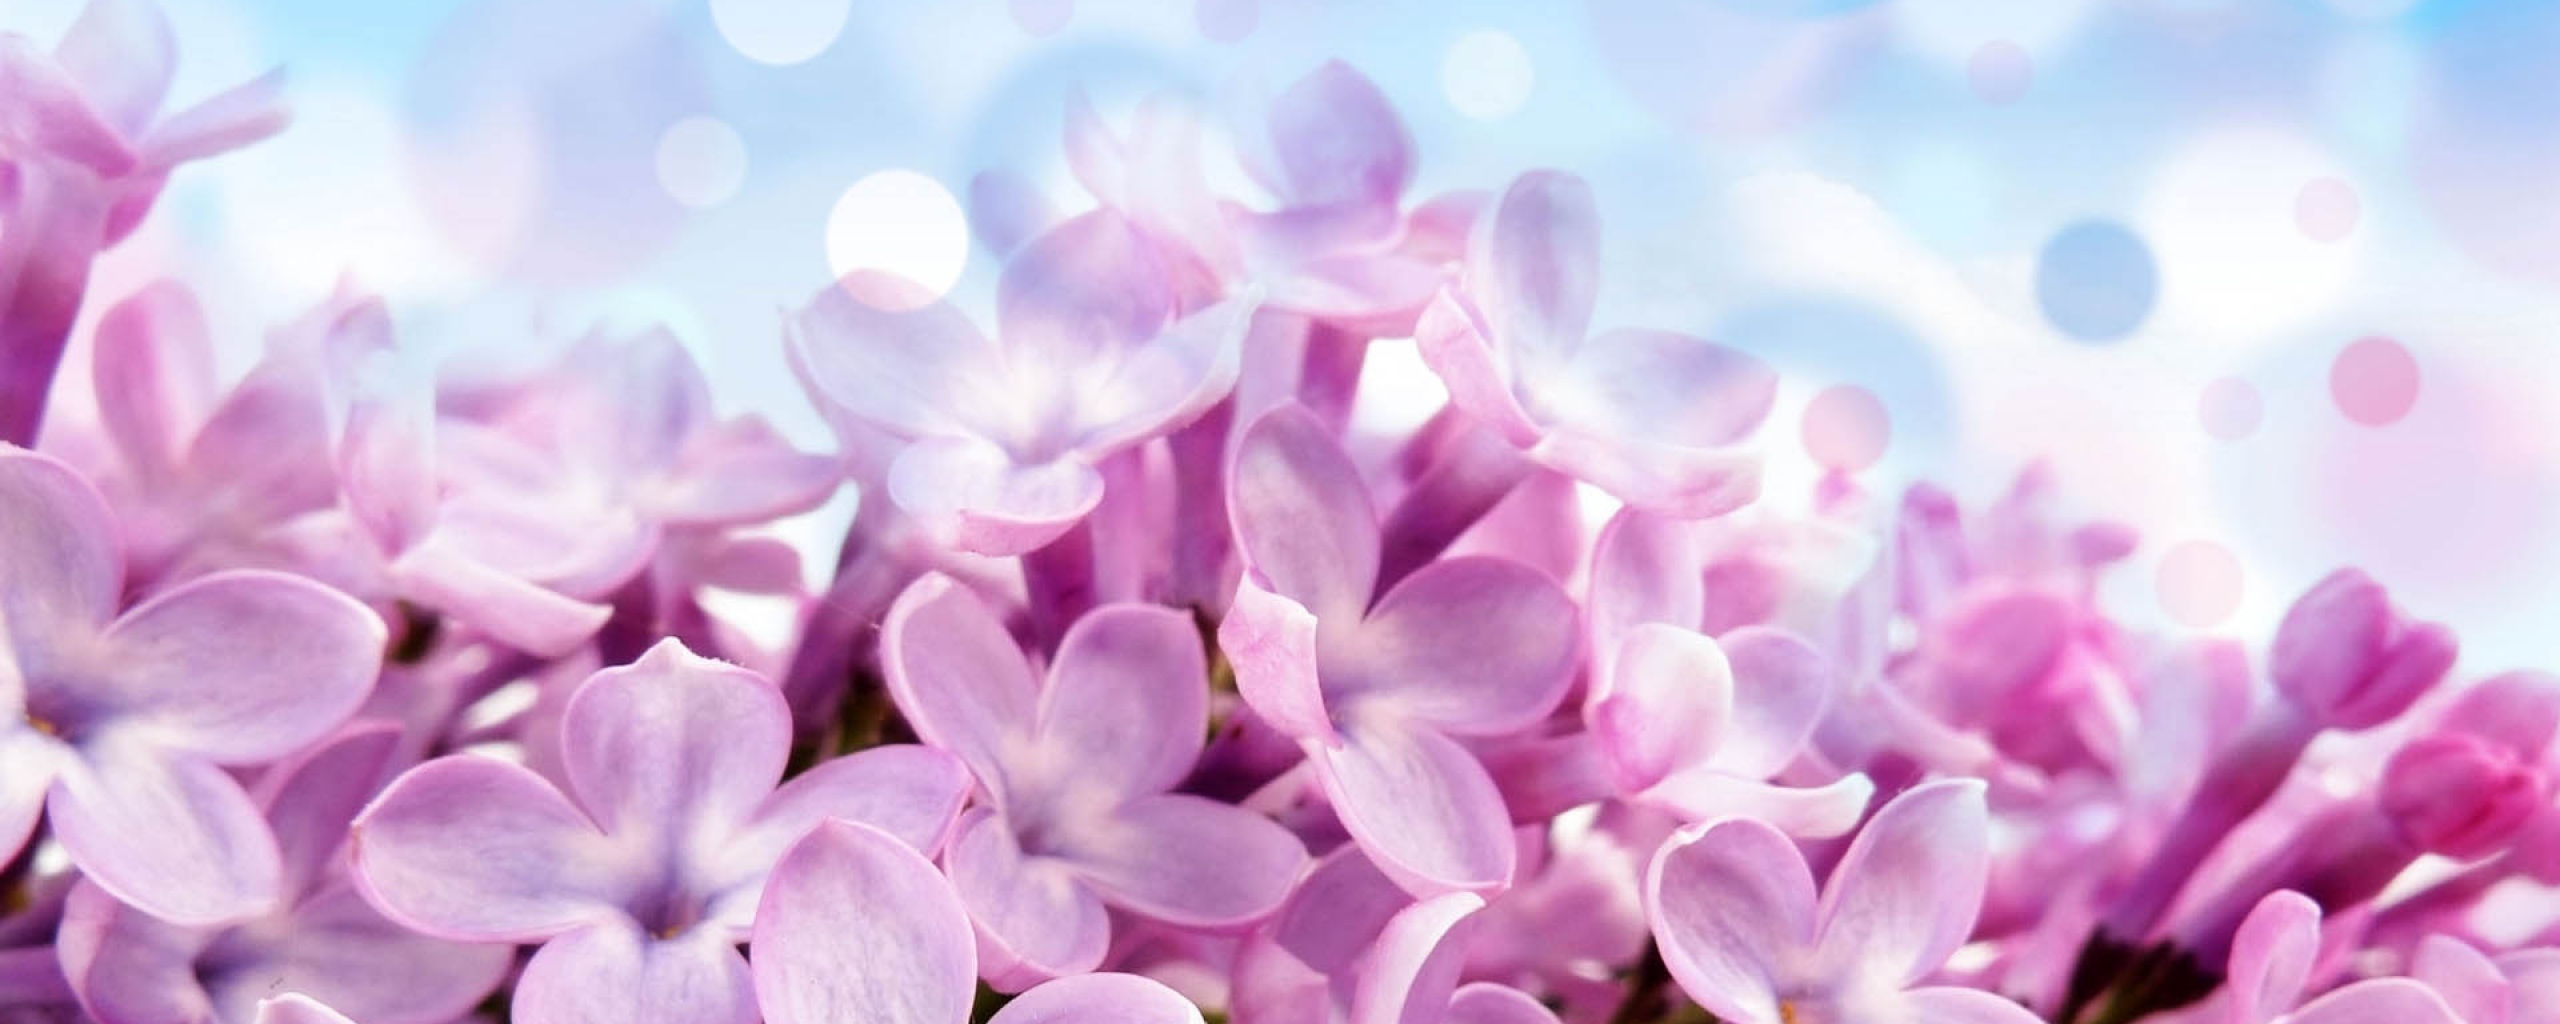 Download Wallpaper 2560x1024 lilac flowers background bright Dual